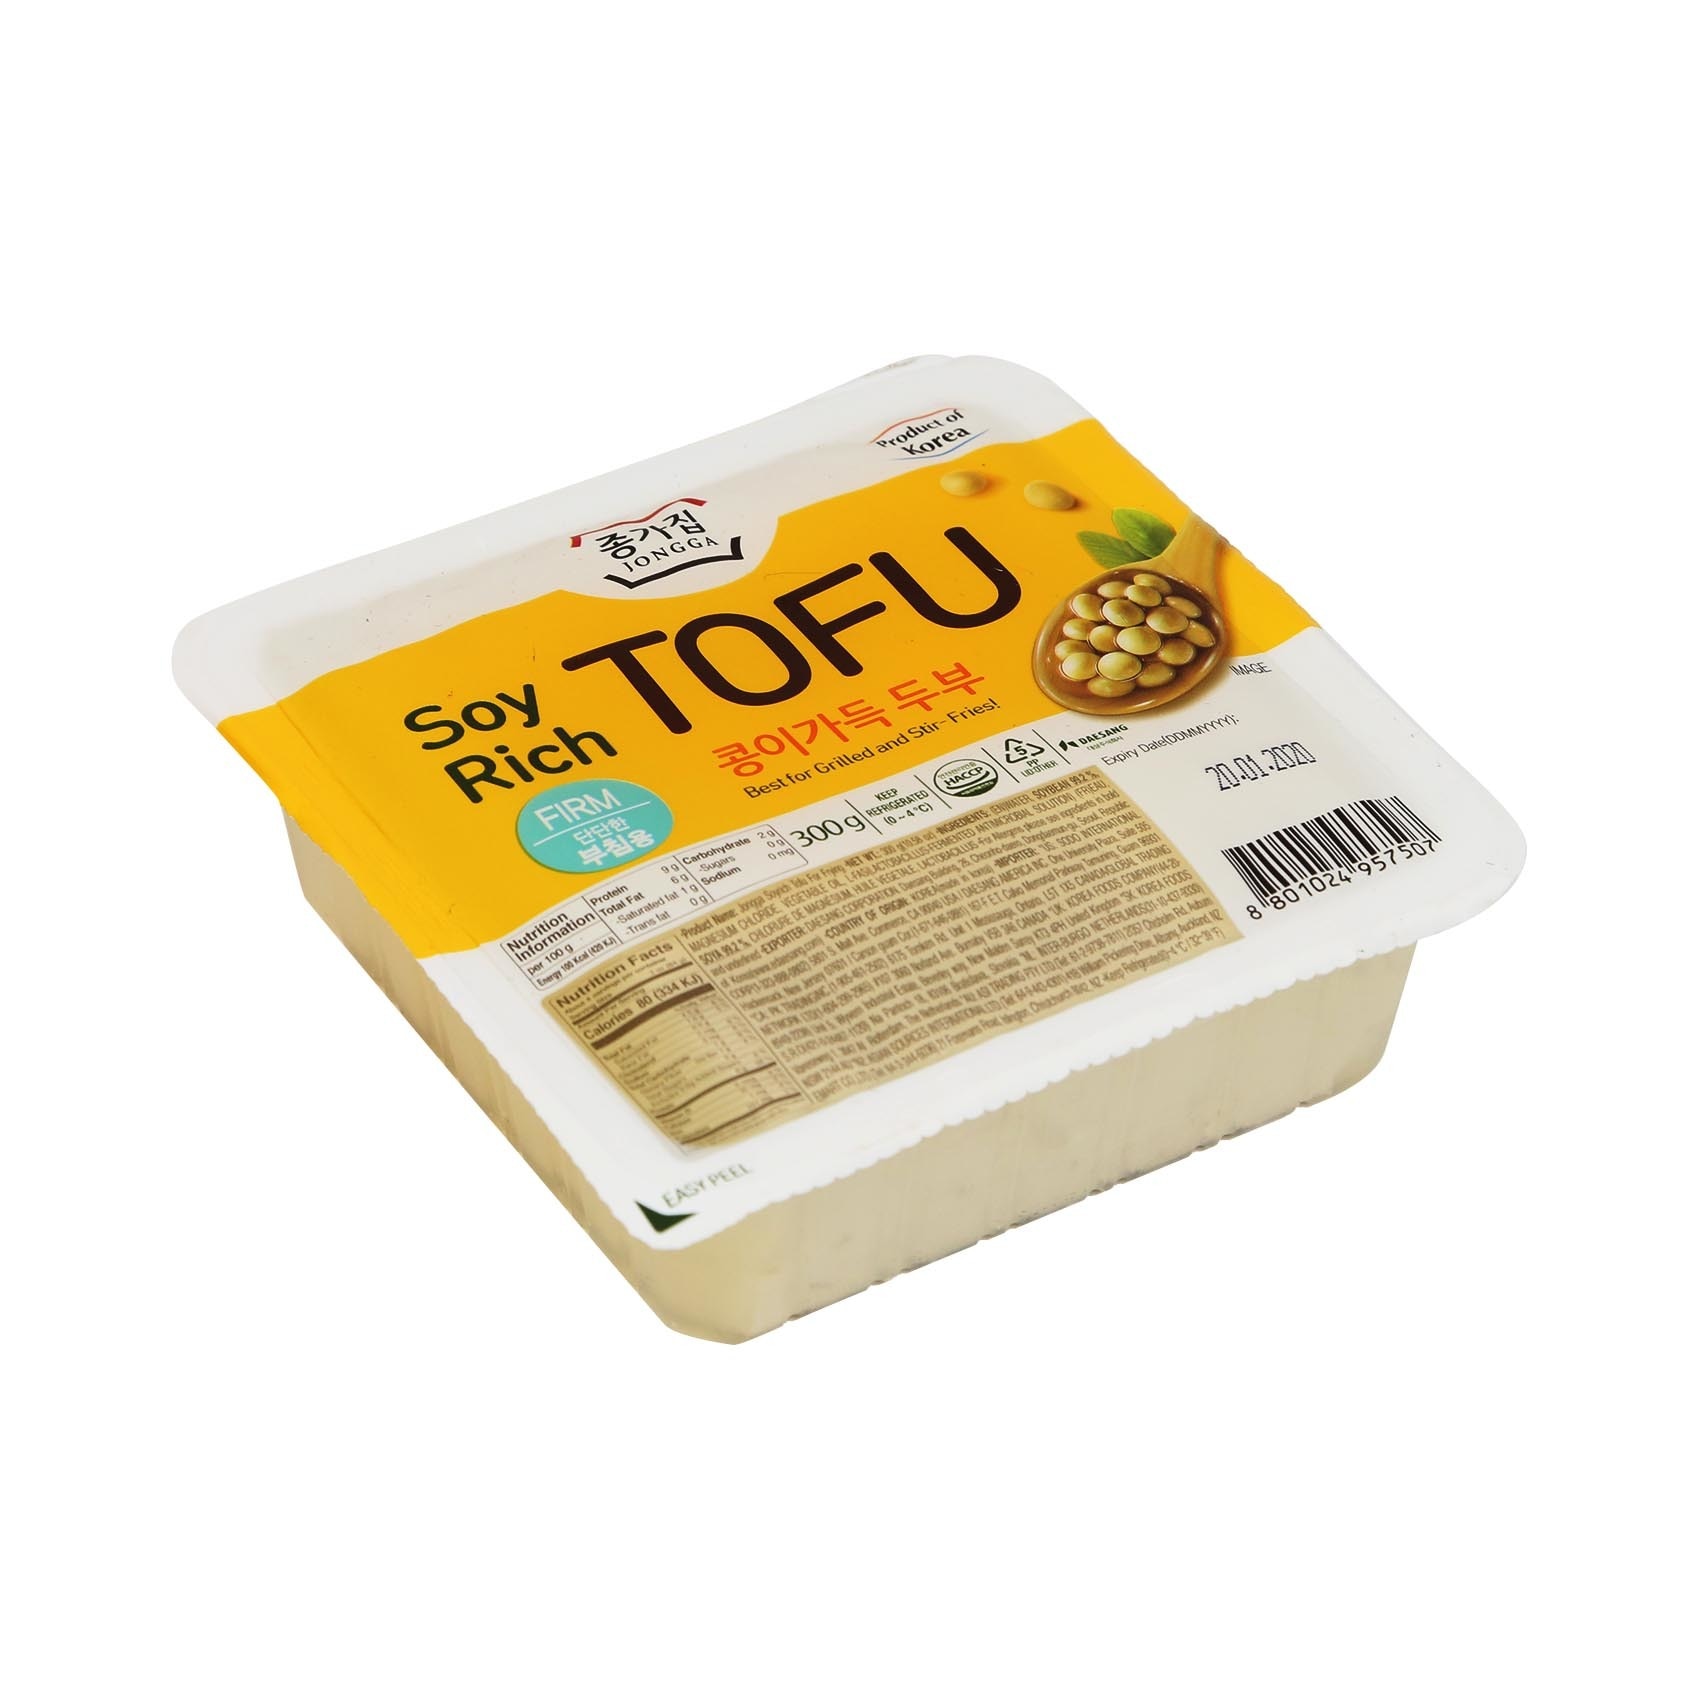 Award winning extra firm tofu by Hodo — Organic, Delicious Plant